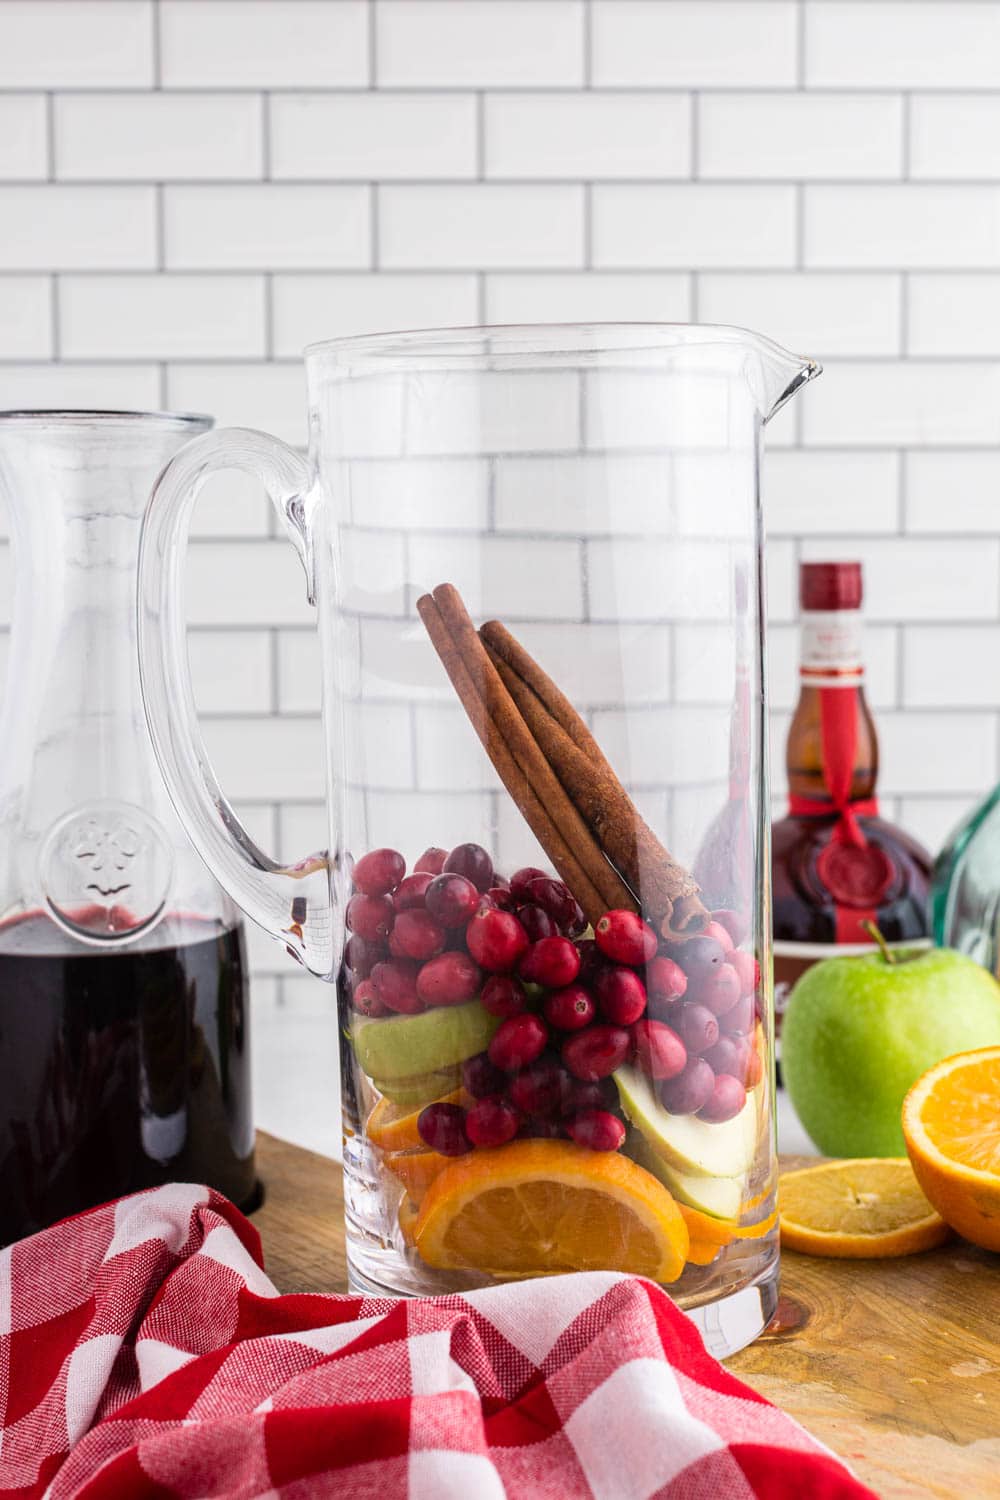 Glass pitcher filled with cranberries, cinnamon sticks, sliced apples and oranges, a glass decanter with red wine and half an orange on a wooden kitchen board, red and white checked linen, a bottle of Grand Marnier, white subway tiles as background.